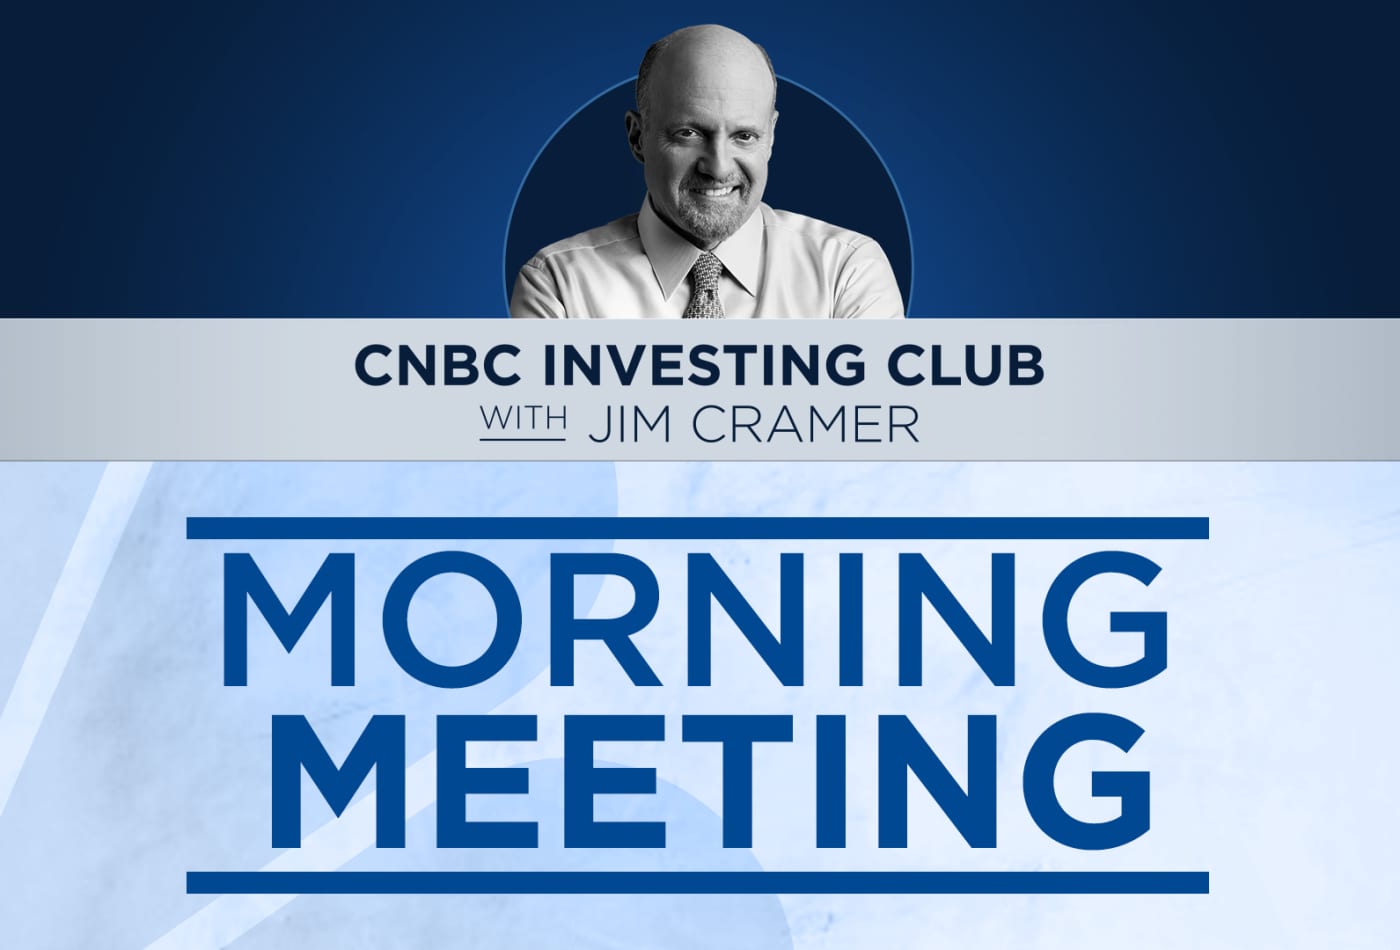 Morning Meeting: Jim Cramer discusses whether or not to buy Qualcomm, Walmart and Ford downgrades, and more